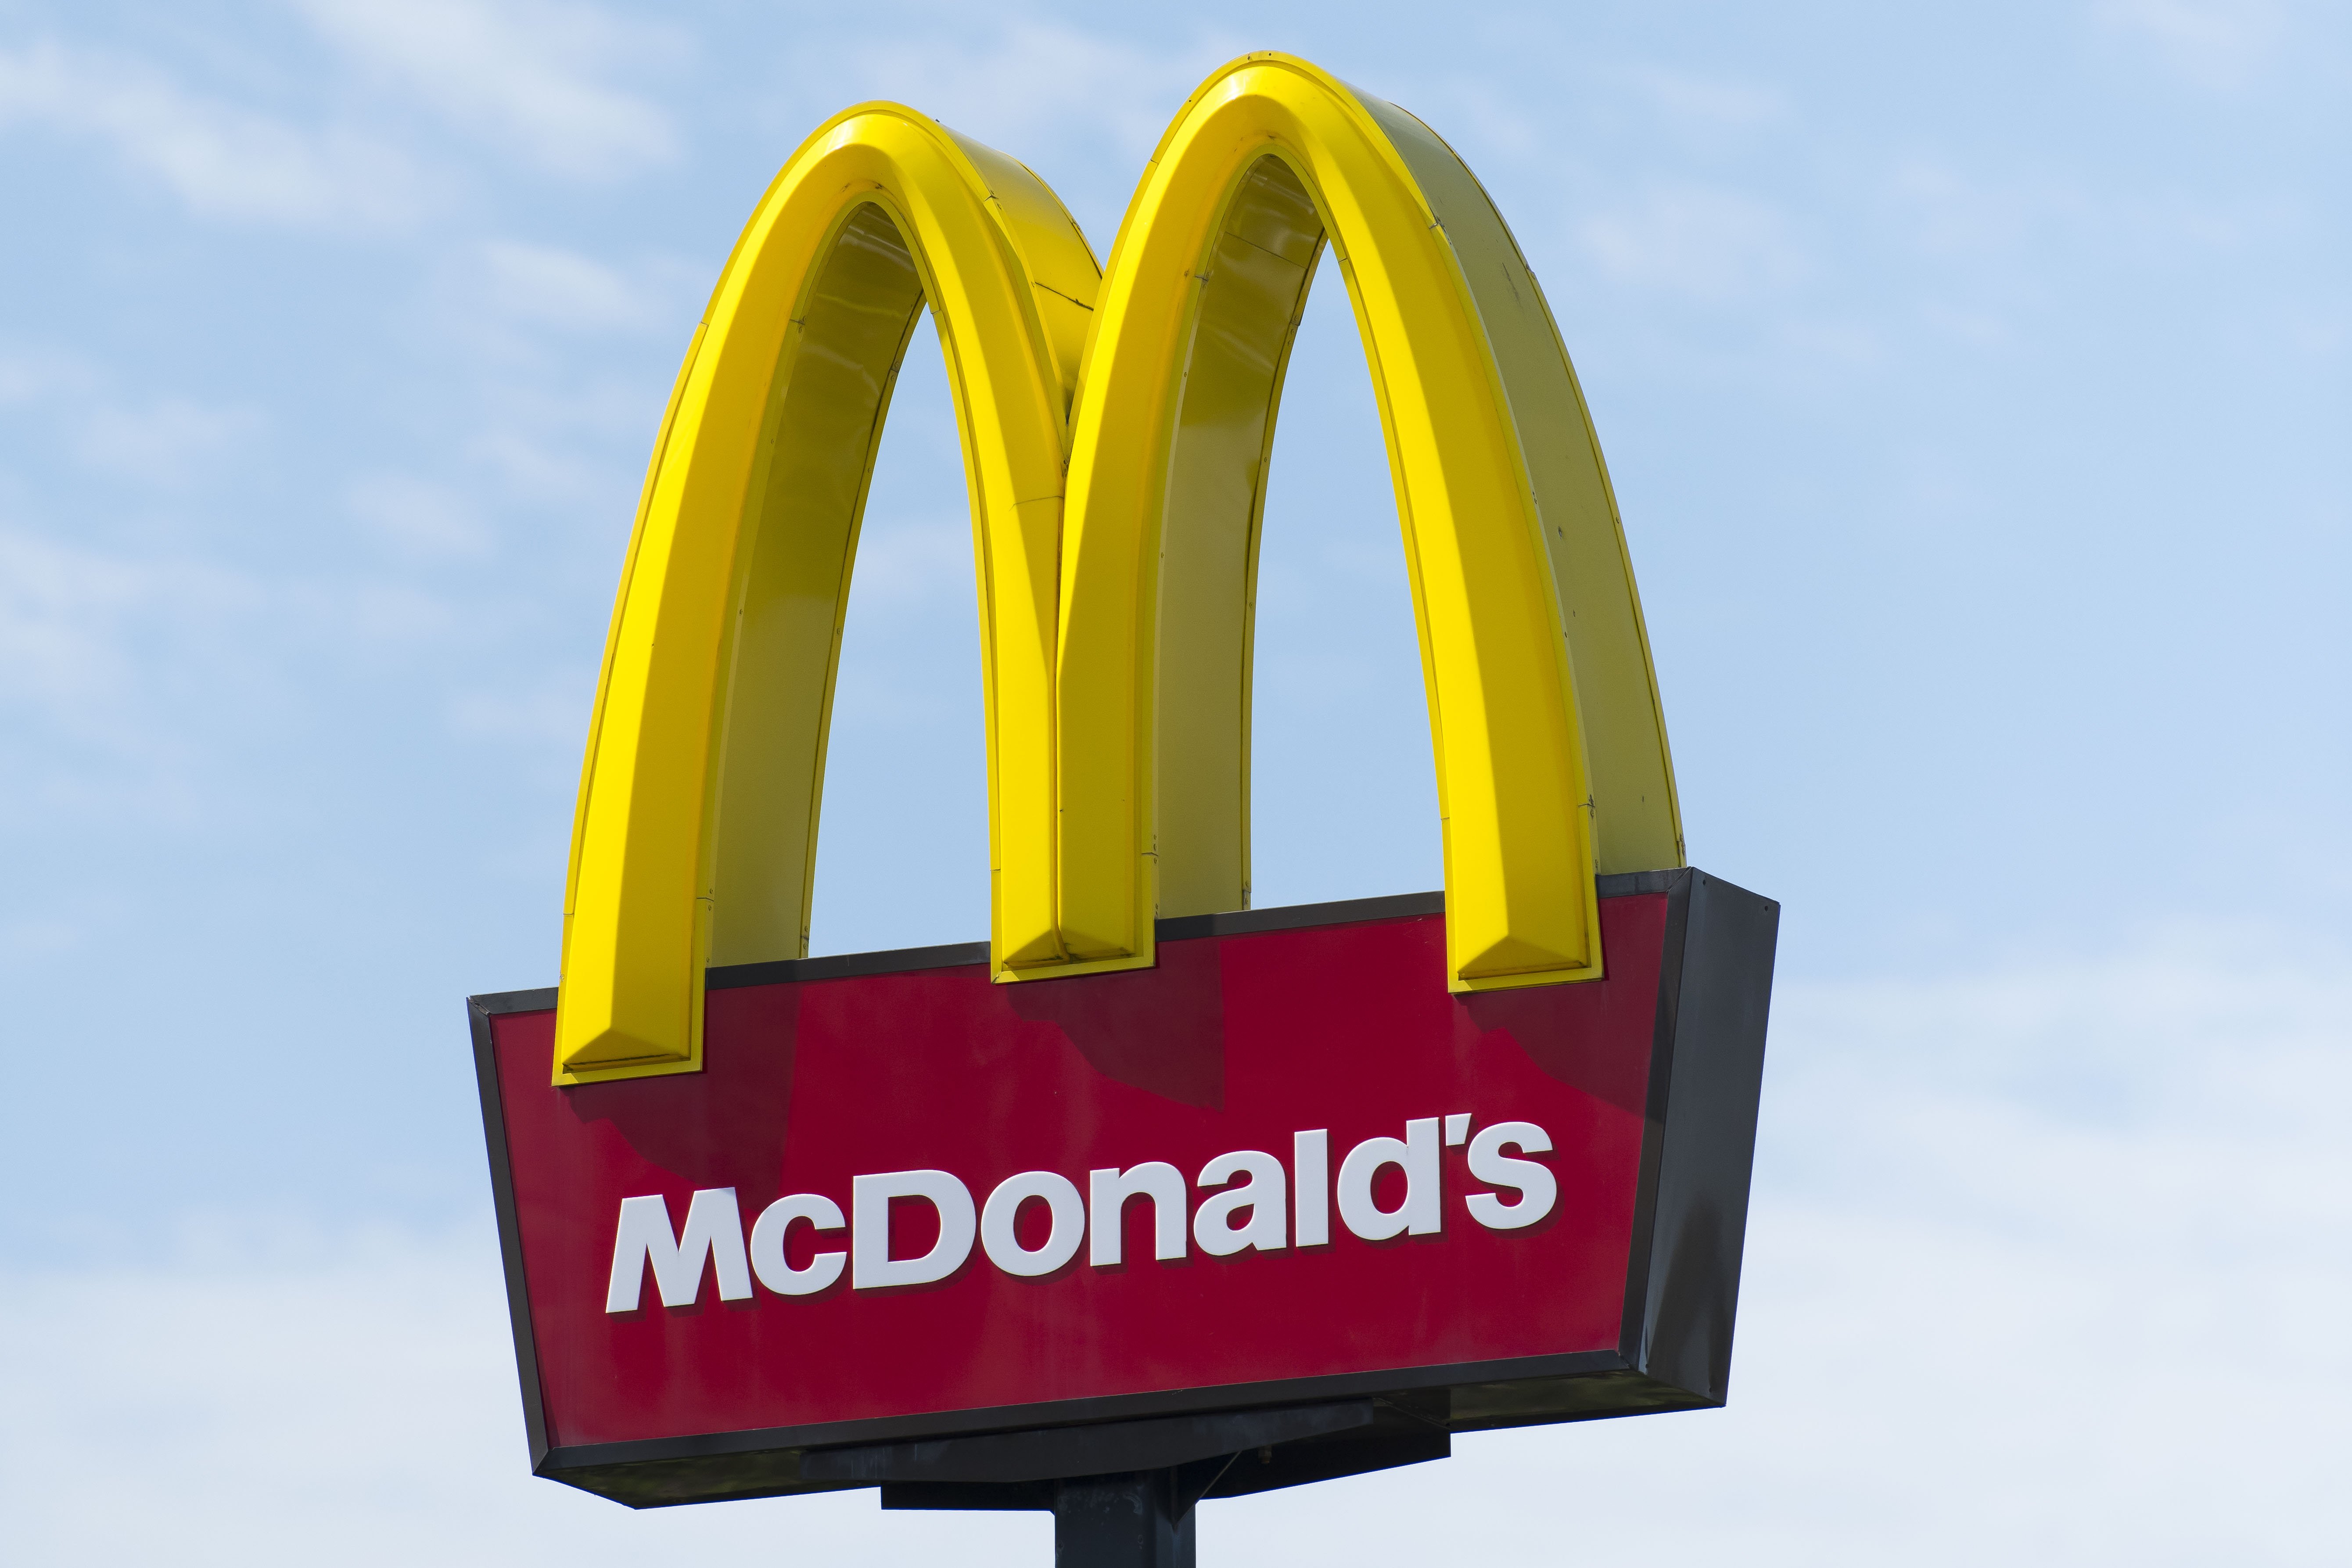 McDonald's golden arches in New Zealand | Photo: Getty Images